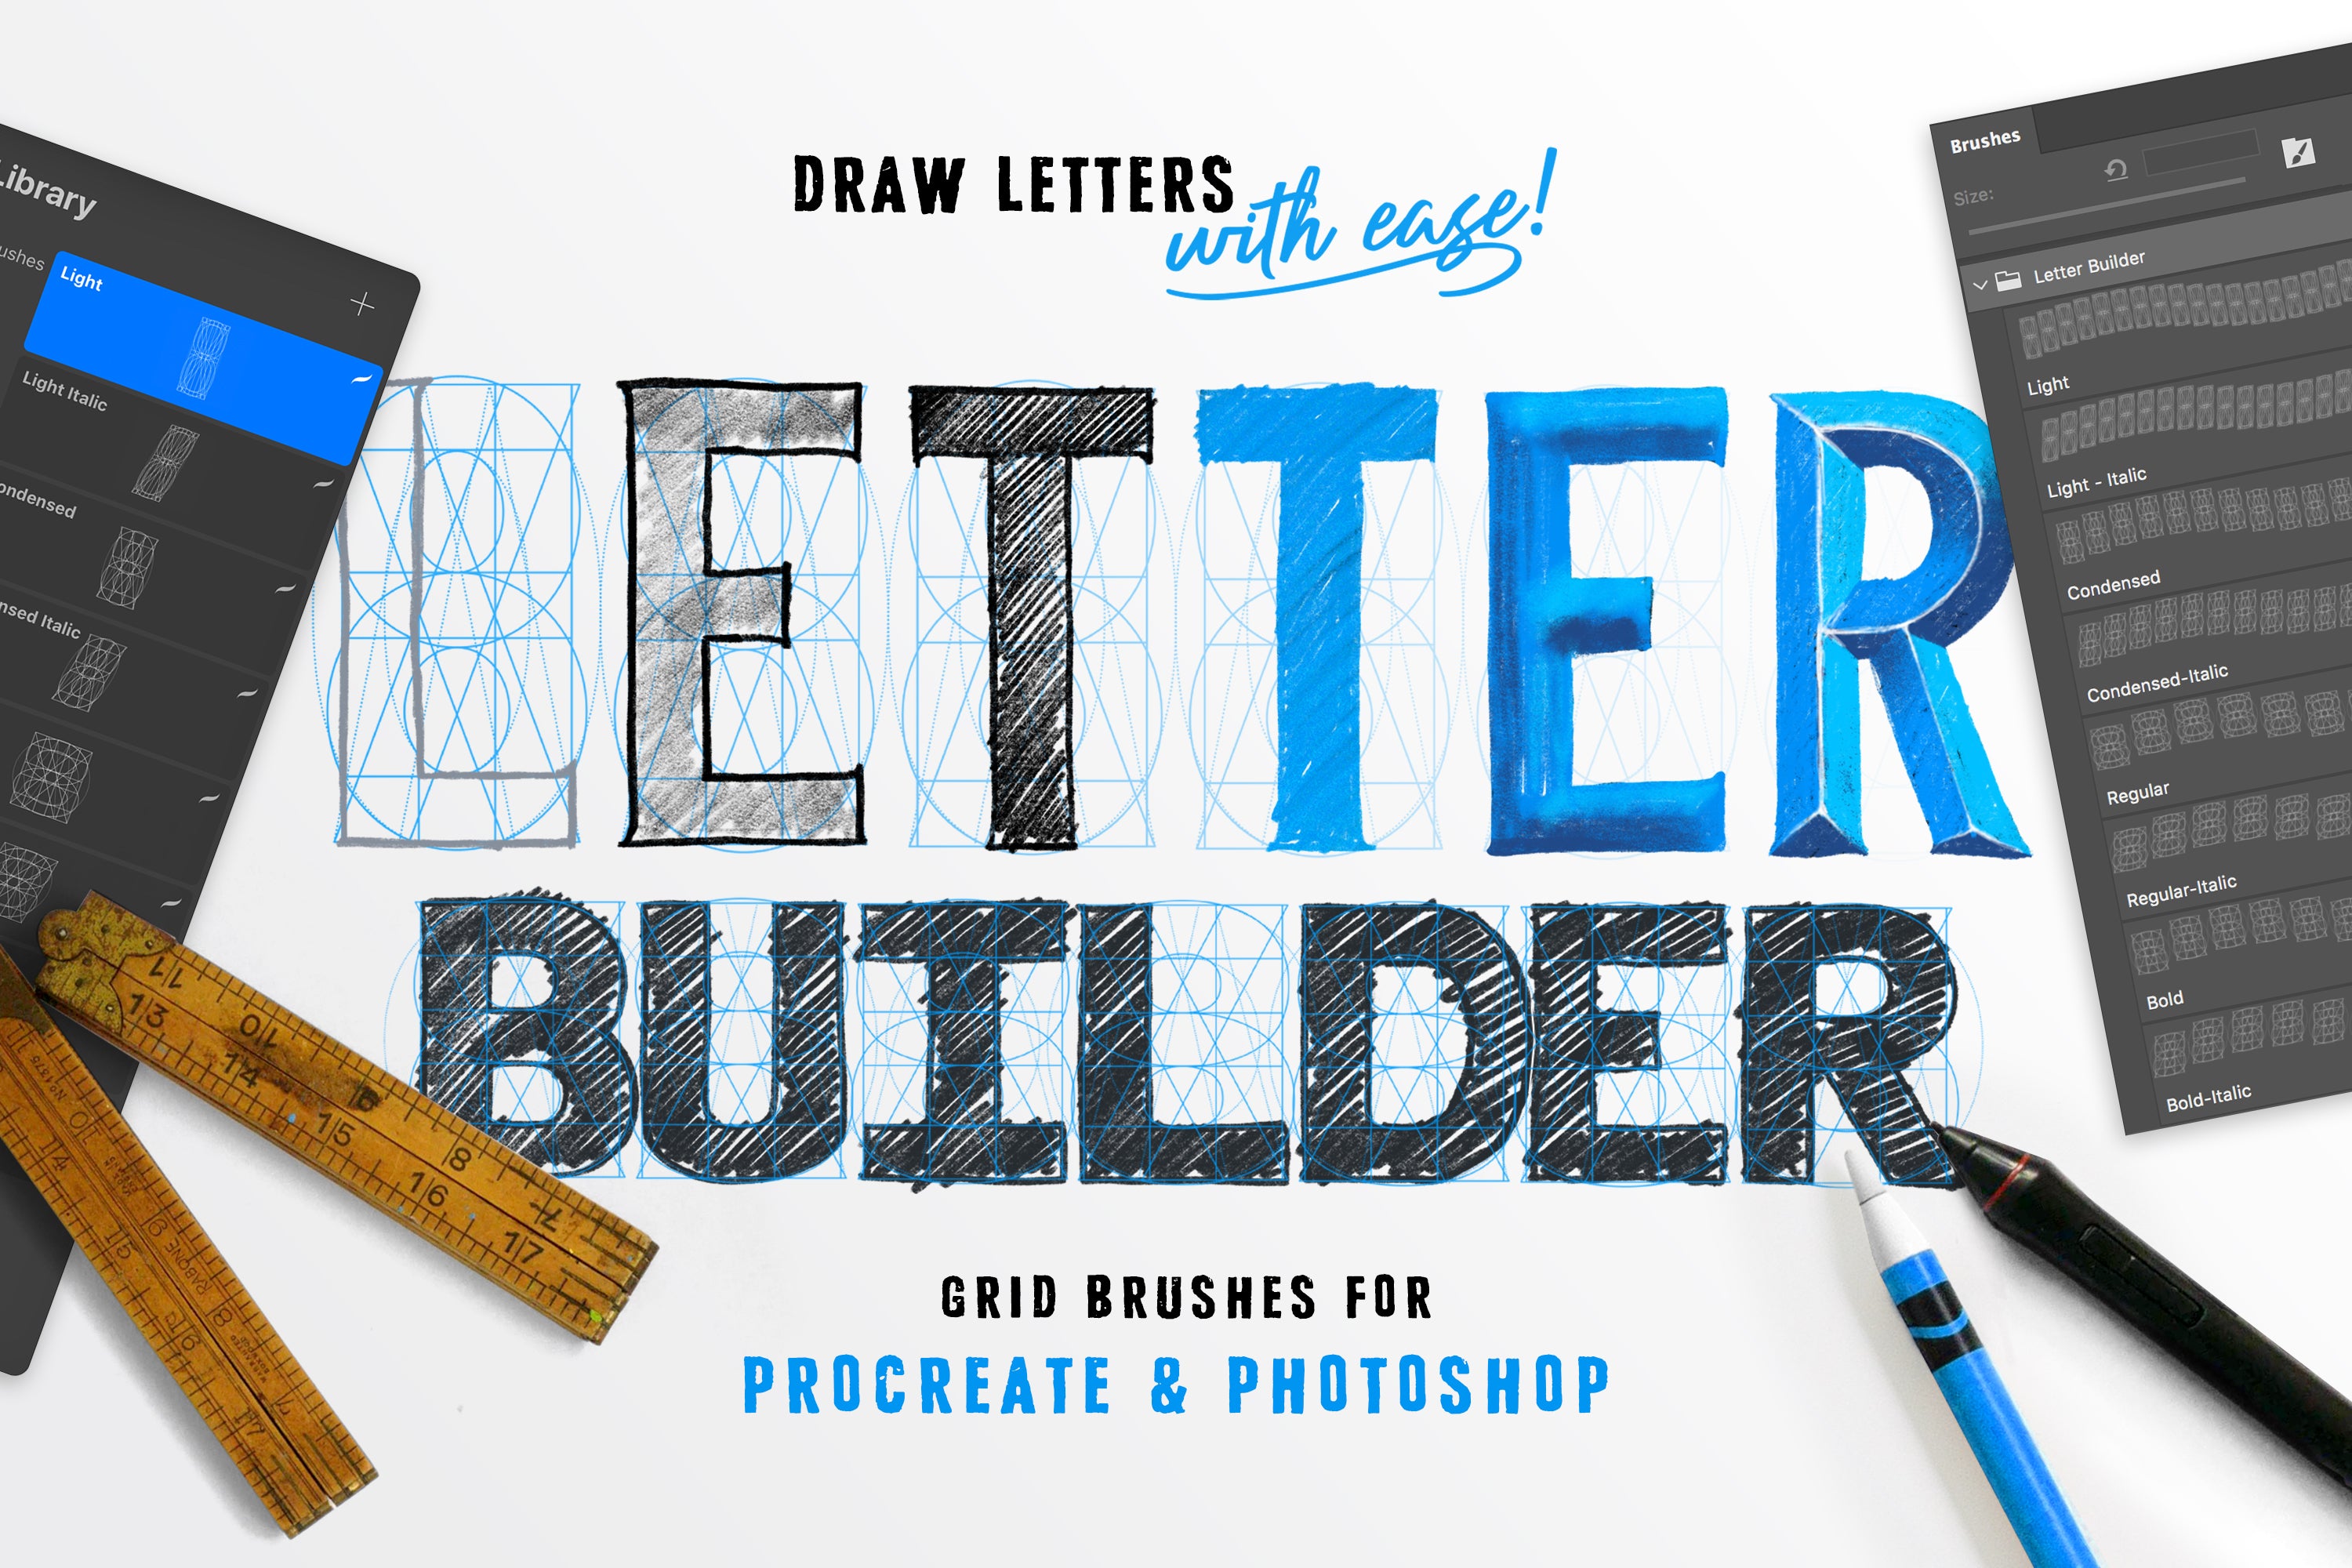 Letter Builder - Draw letters with Ease!